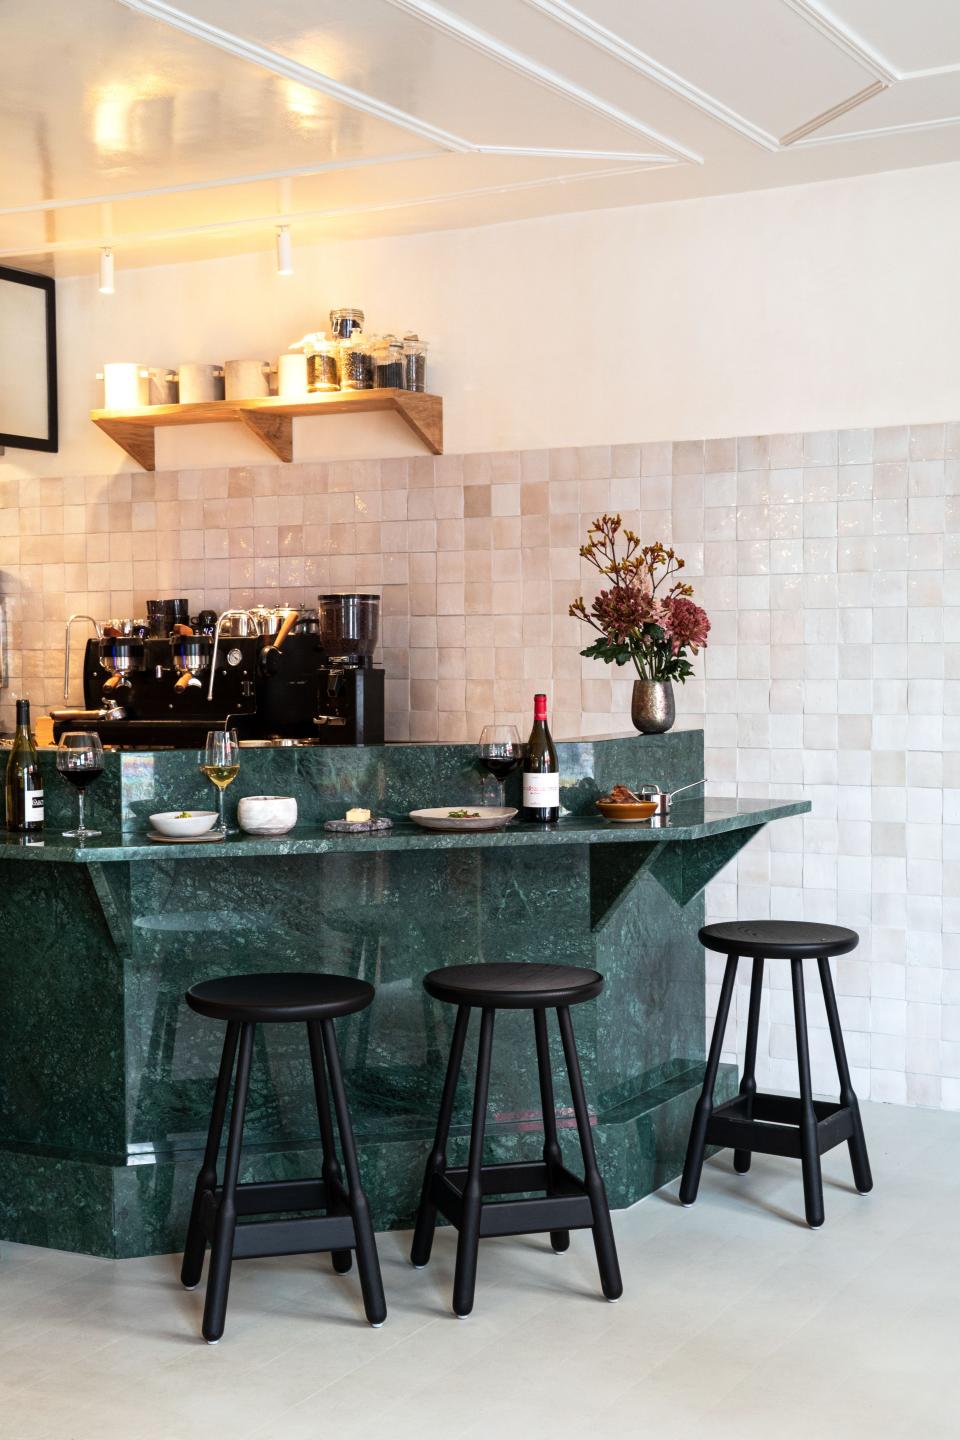 The rich green marble bar makes a great contrast against the pale square tilework along the wall.